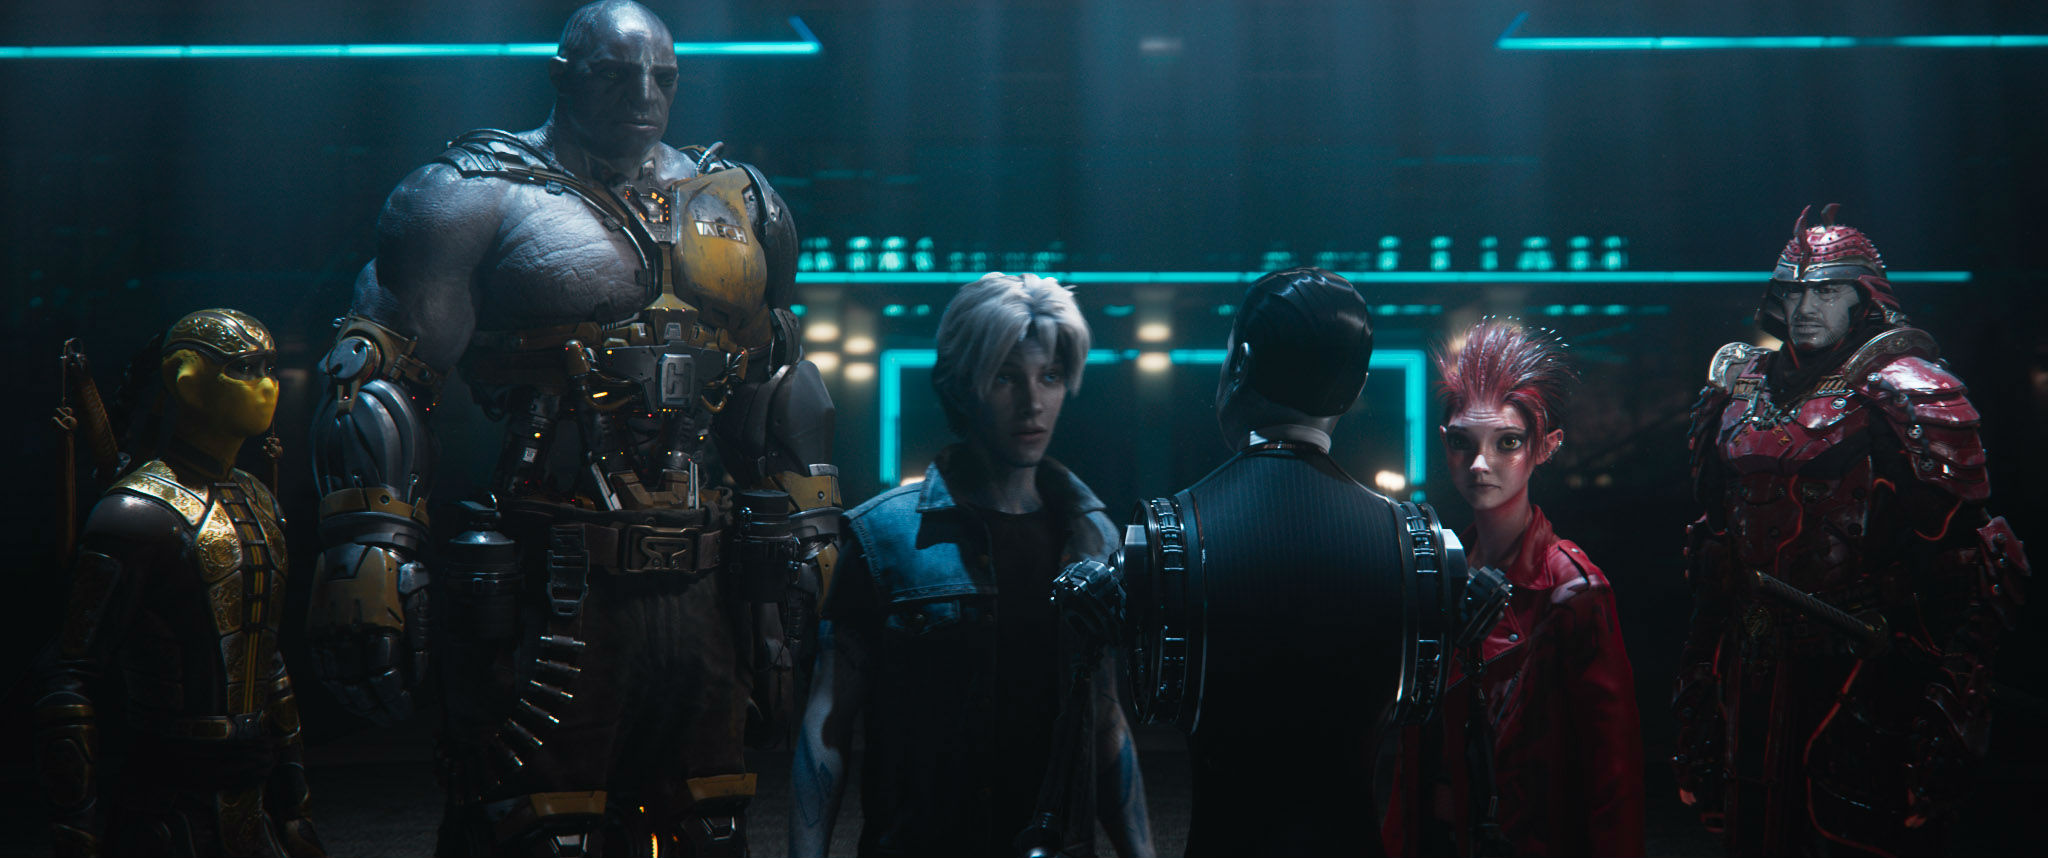 Steven Spielberg Made Ready Player One Work In Spite Of Itself